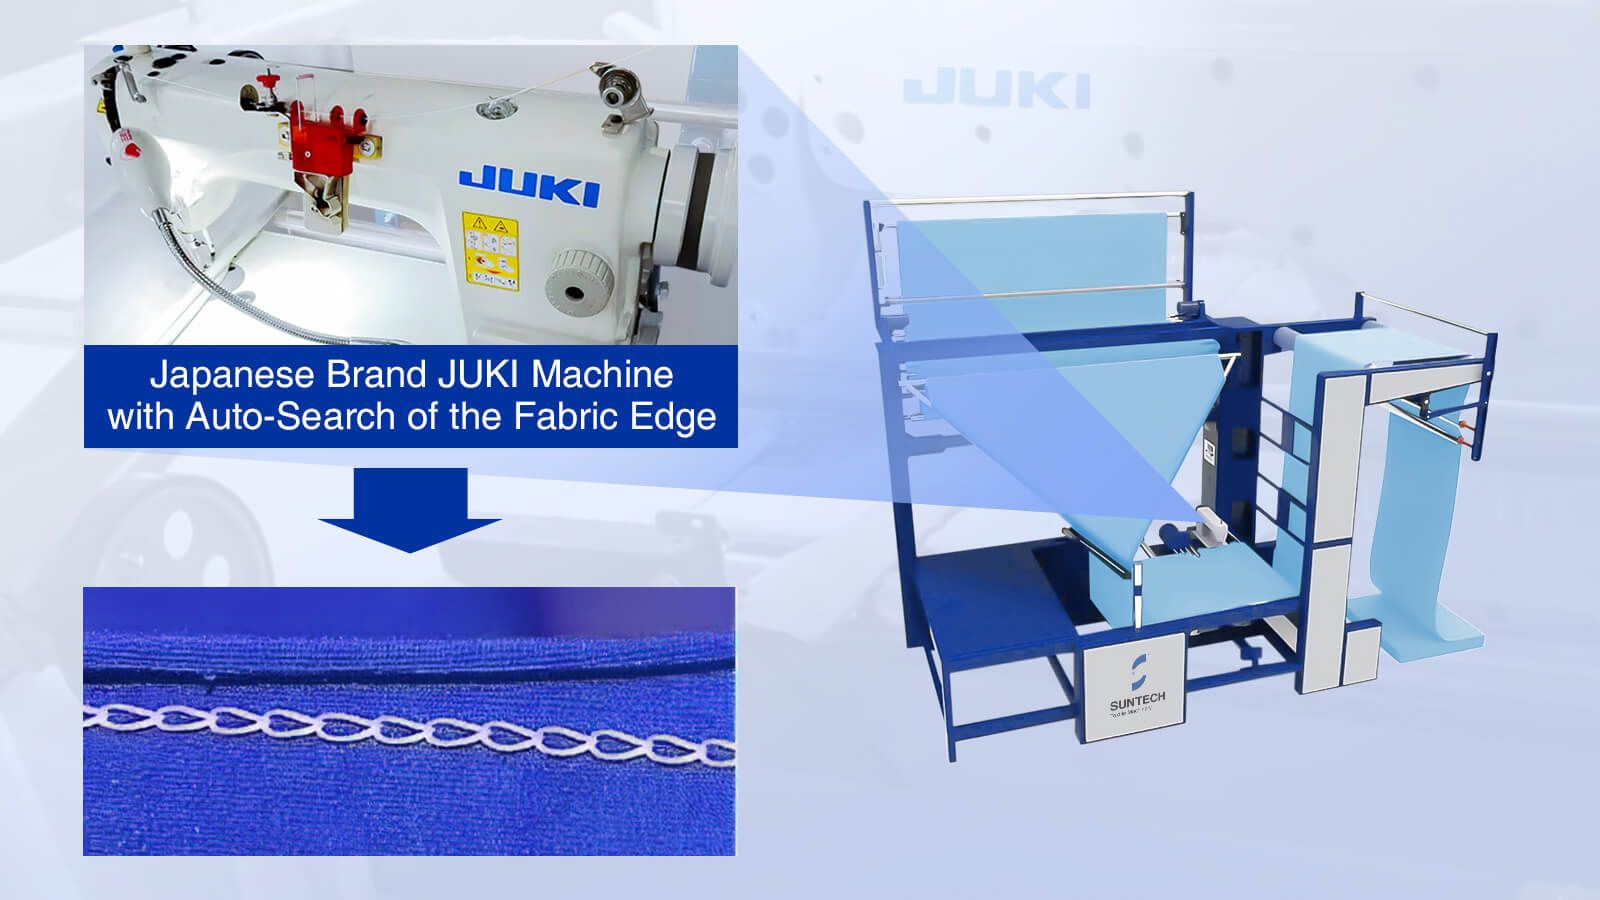 Japanese Brand JUKI Machine with Auto-Search of the Fabric Edge